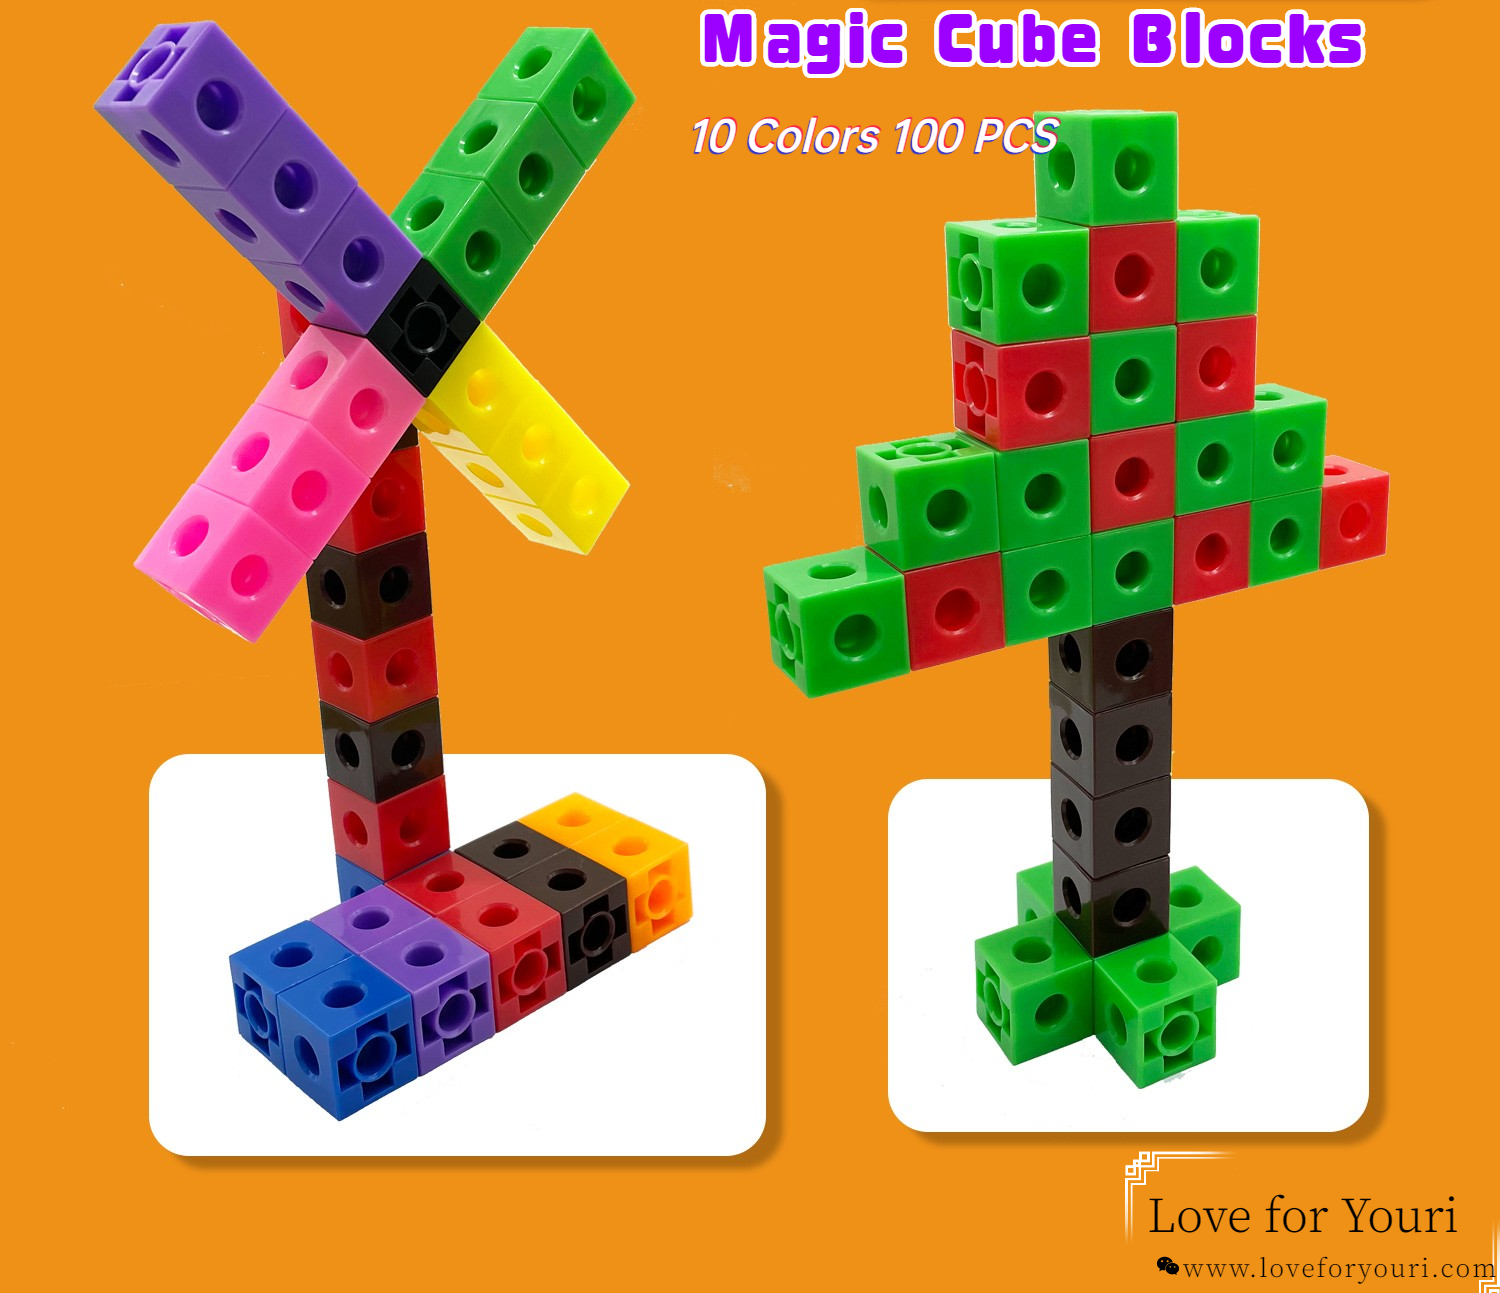 100PCS Math Link Cubes for Construction and Early Math Learning STEM Based Numberblocks Activities for Preschool Classroom Supplies Wholesale